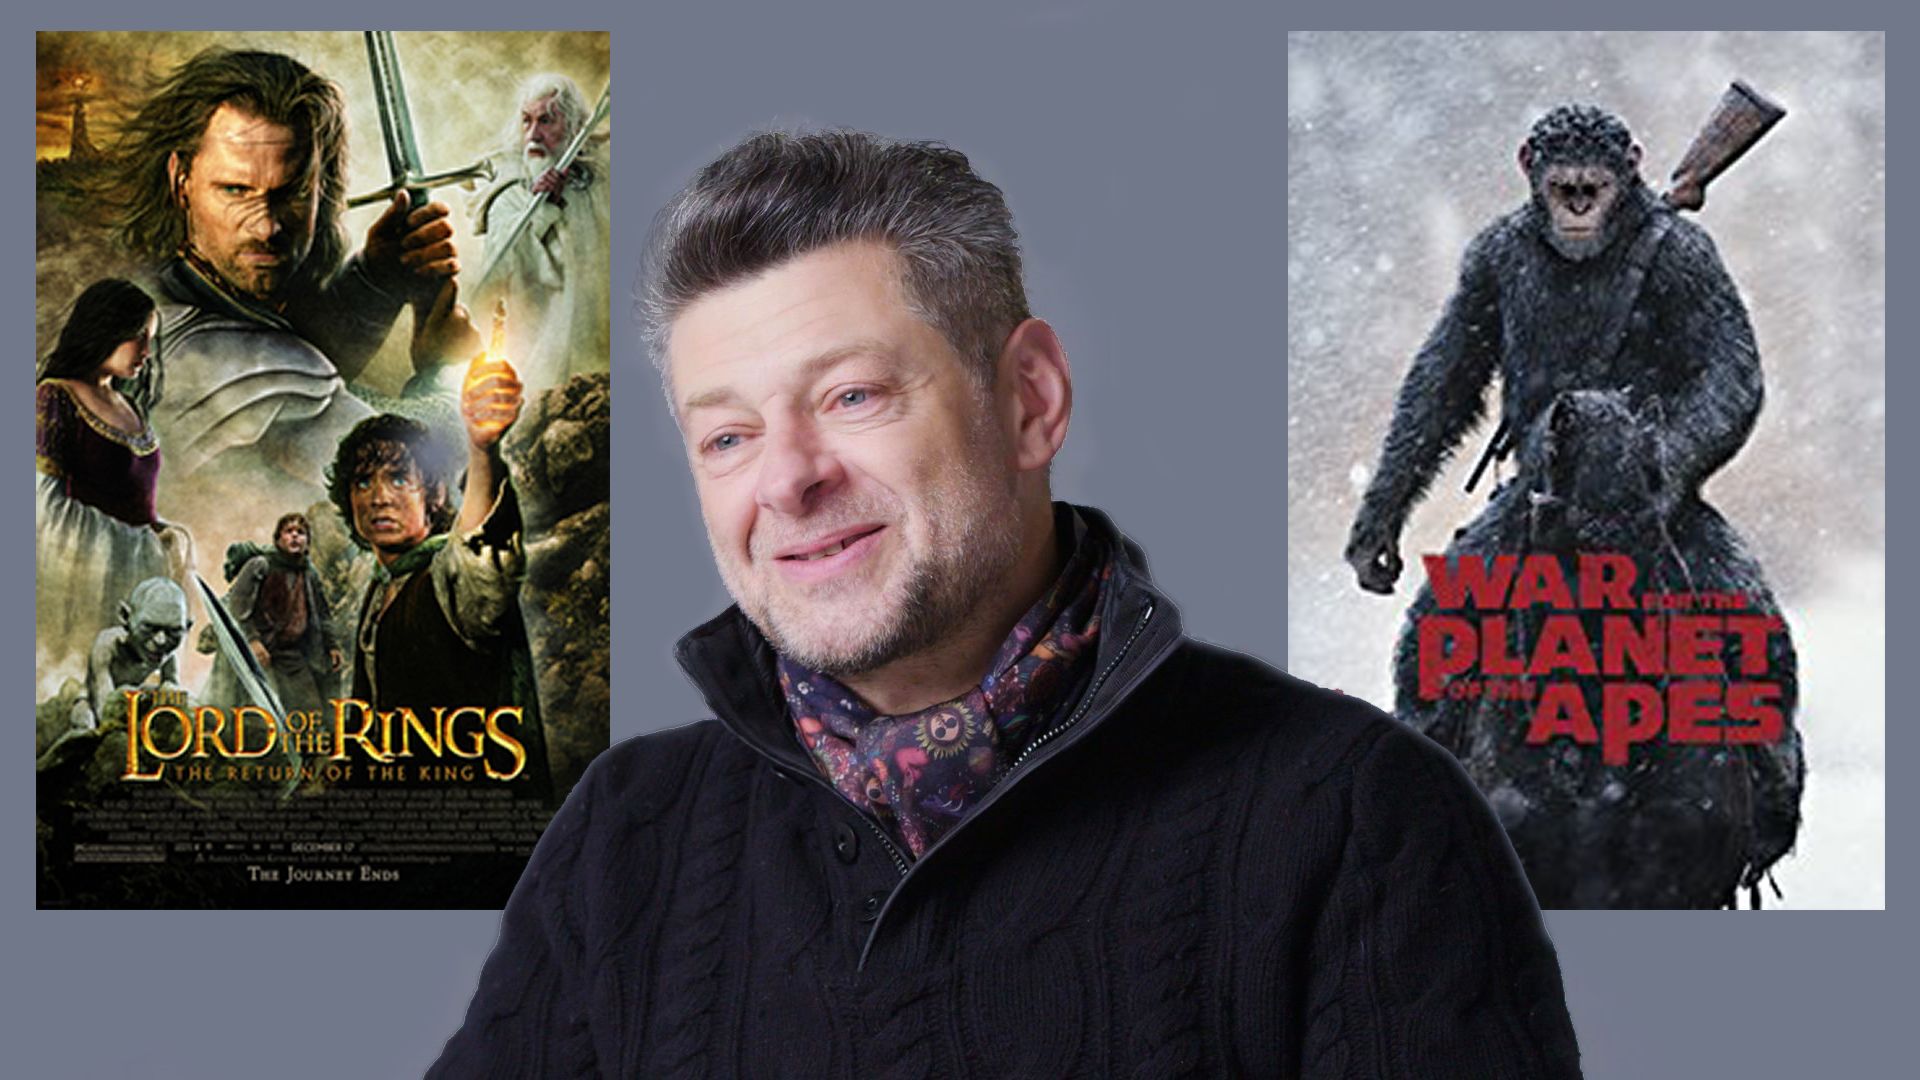 Andy Serkis on Returning to Play Gollum in 'The Hobbit